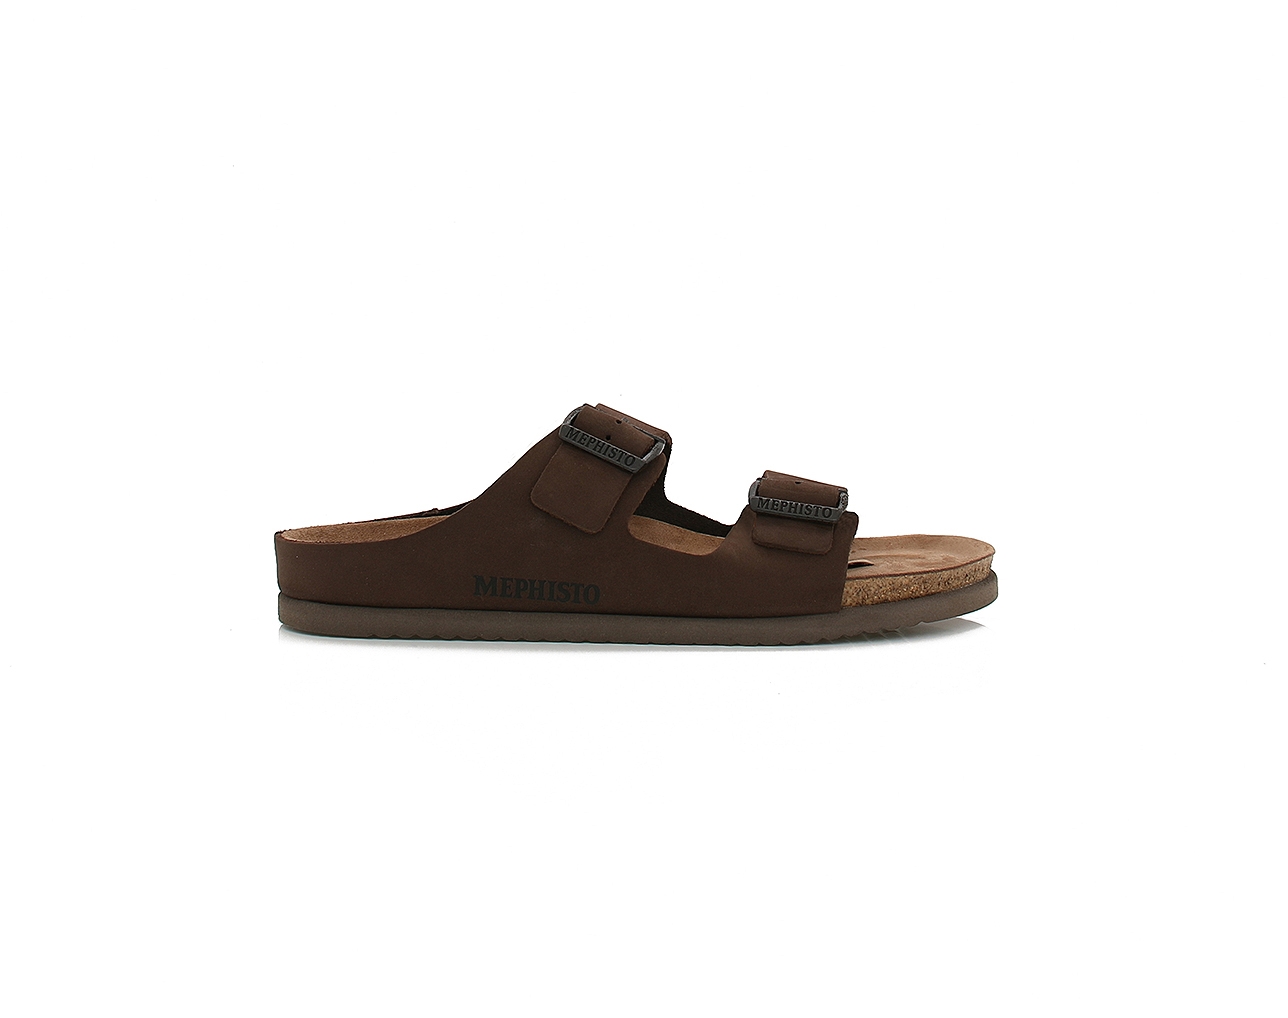 Mens Mephisto Norman Casual Sandals – Buckle / Slip-On – Fits High Instep – Size 43 – Brown / Tan – Nubuck / Leather – ShoeFit